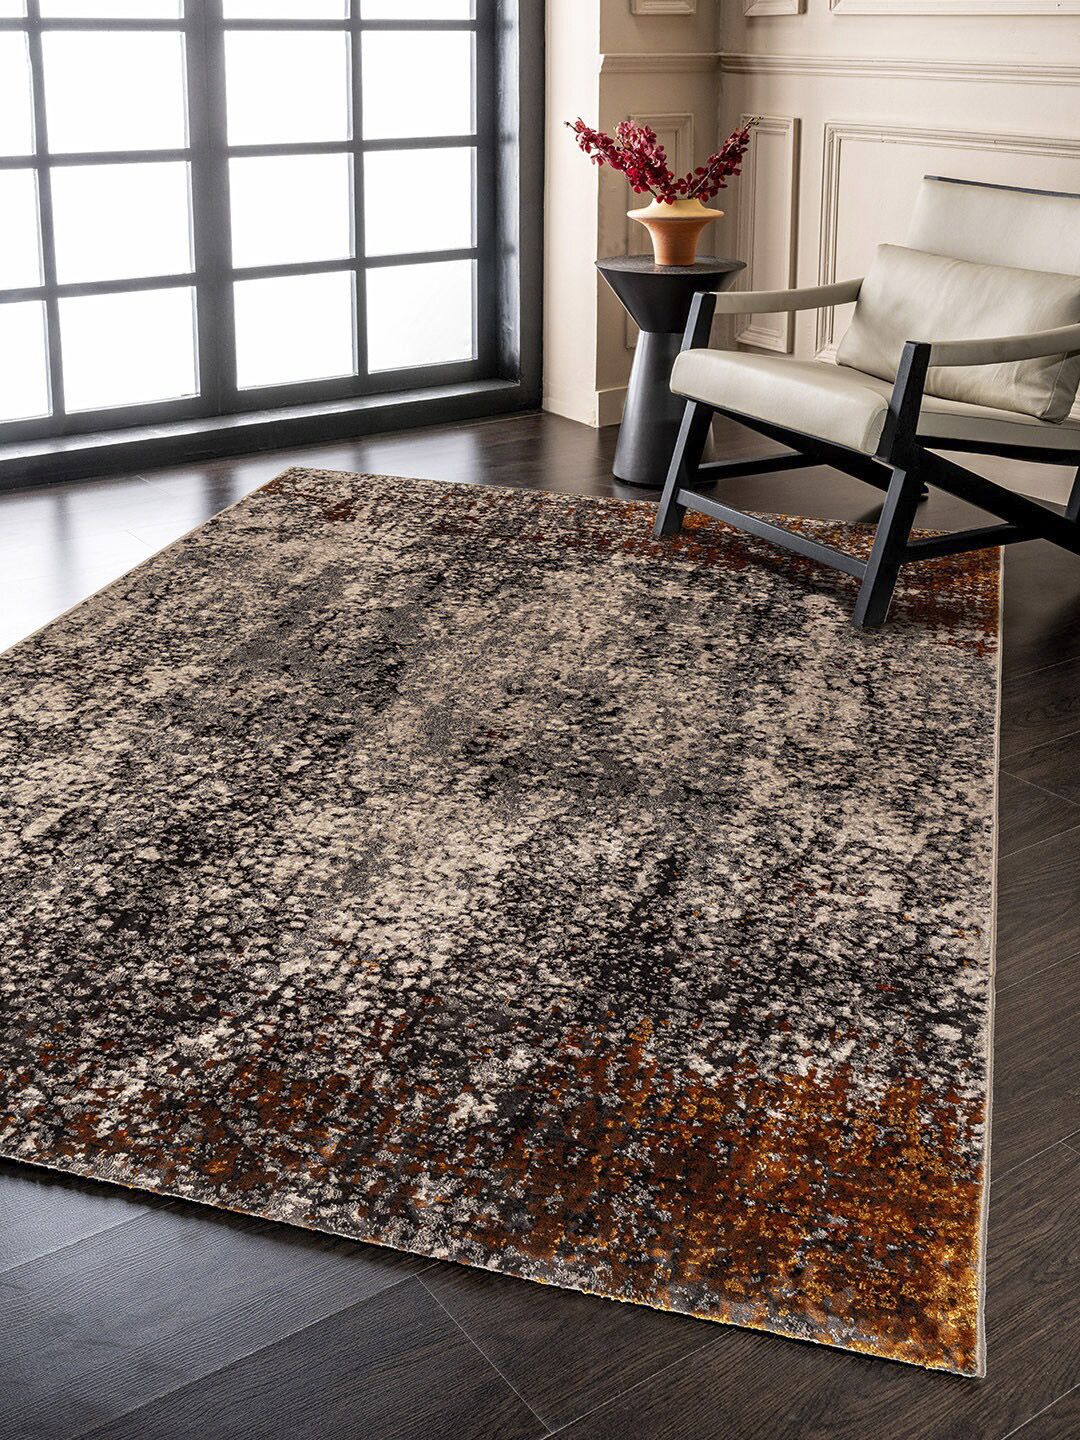 DDecor Beige & Charcoal Grey Textured Carpet Price in India